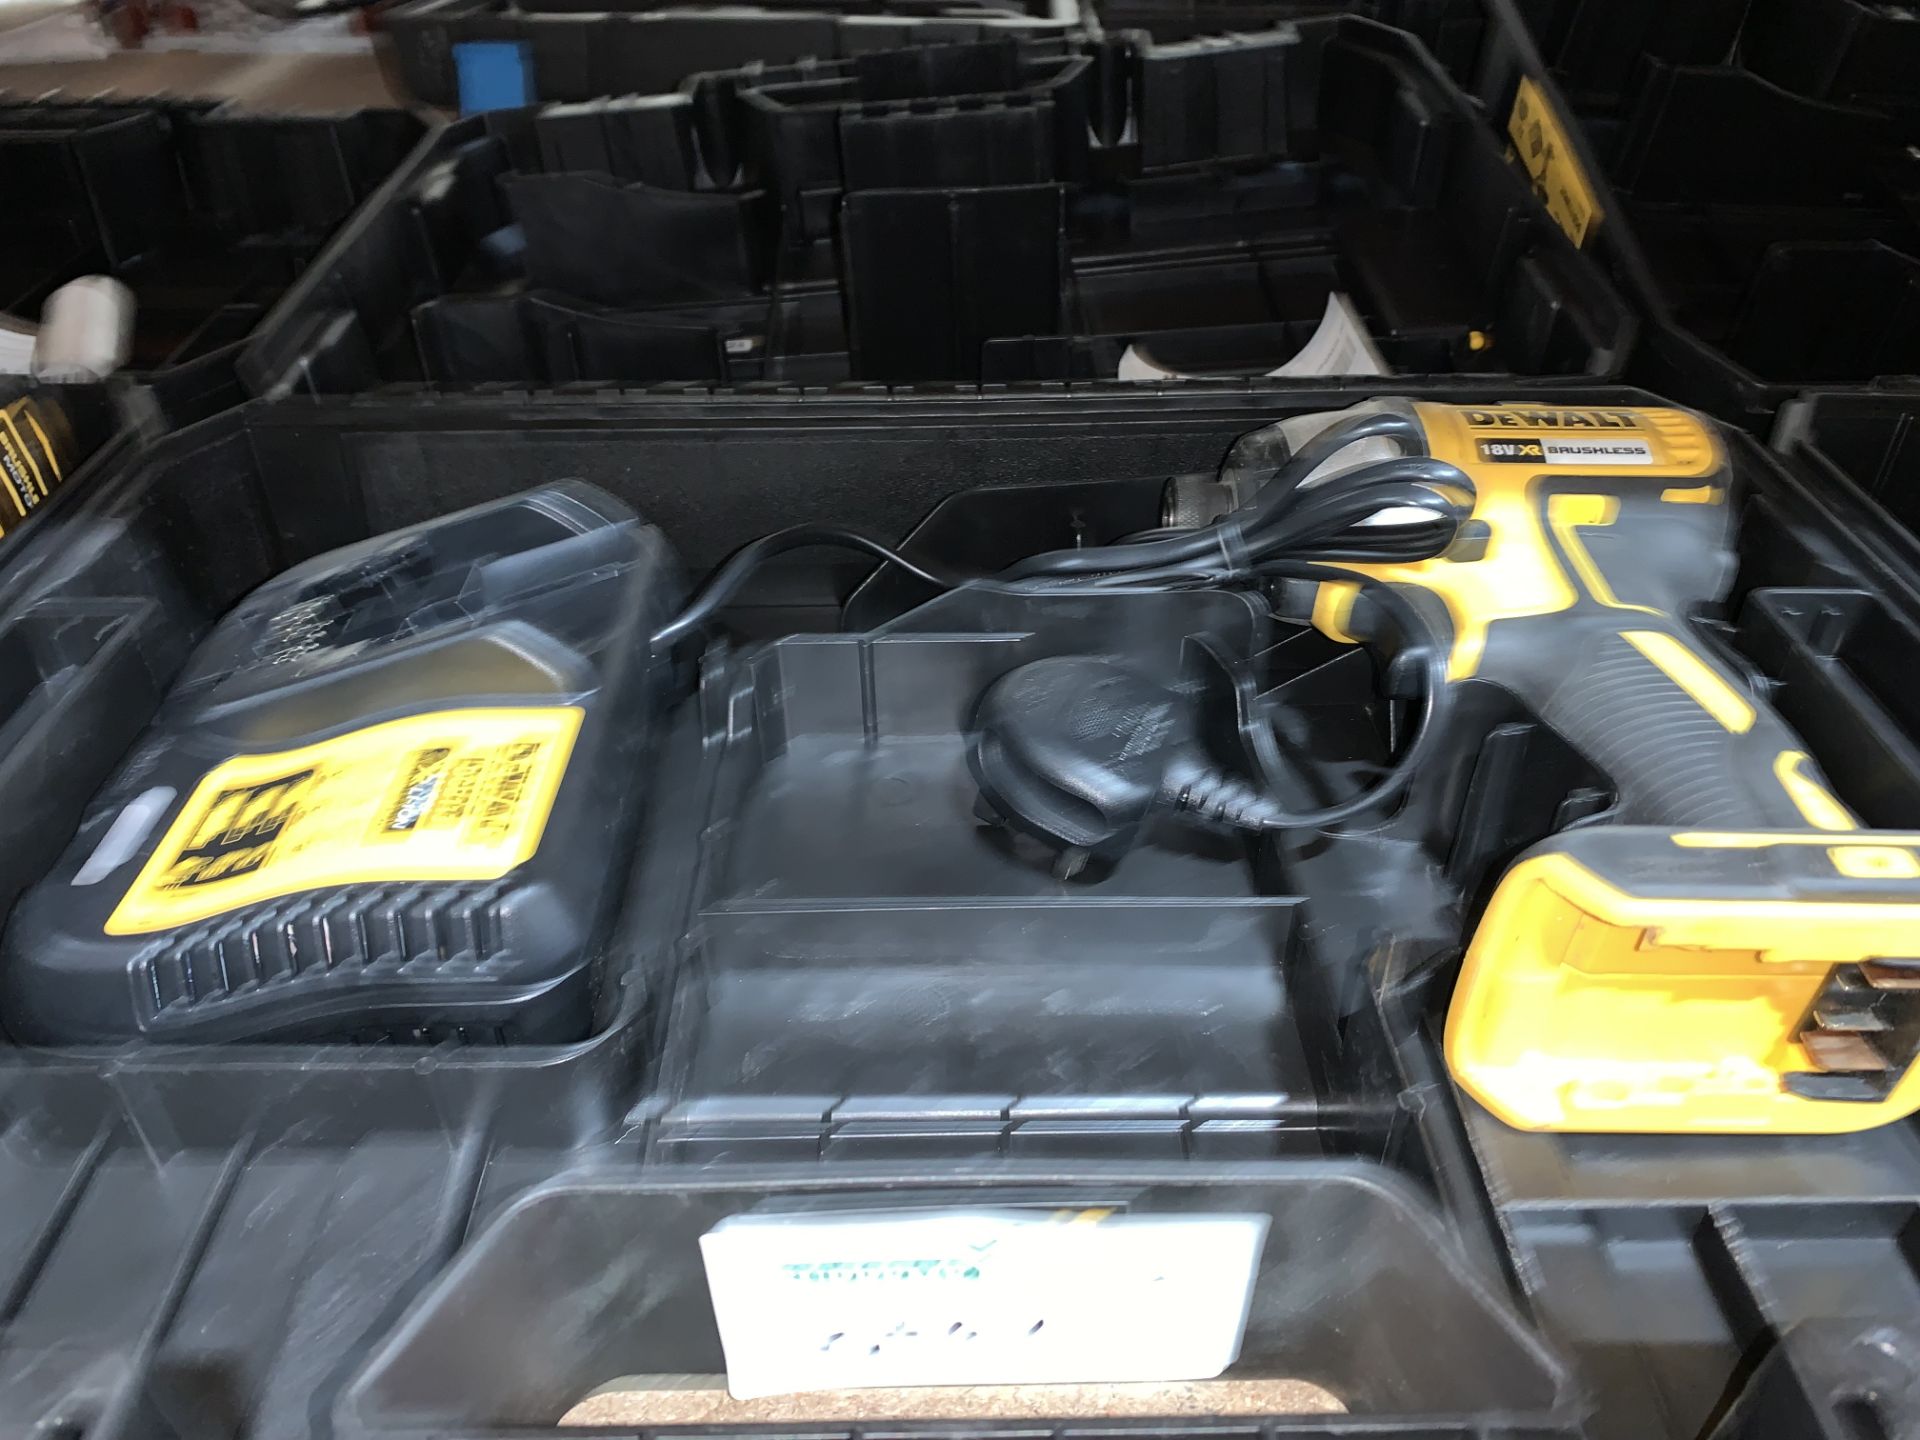 DEWALT DCF787D2T-SFGB 18V 2.0AH LI-ION XR BRUSHLESS CORDLESS IMPACT DRIVER COMES WITH CHARGER AND